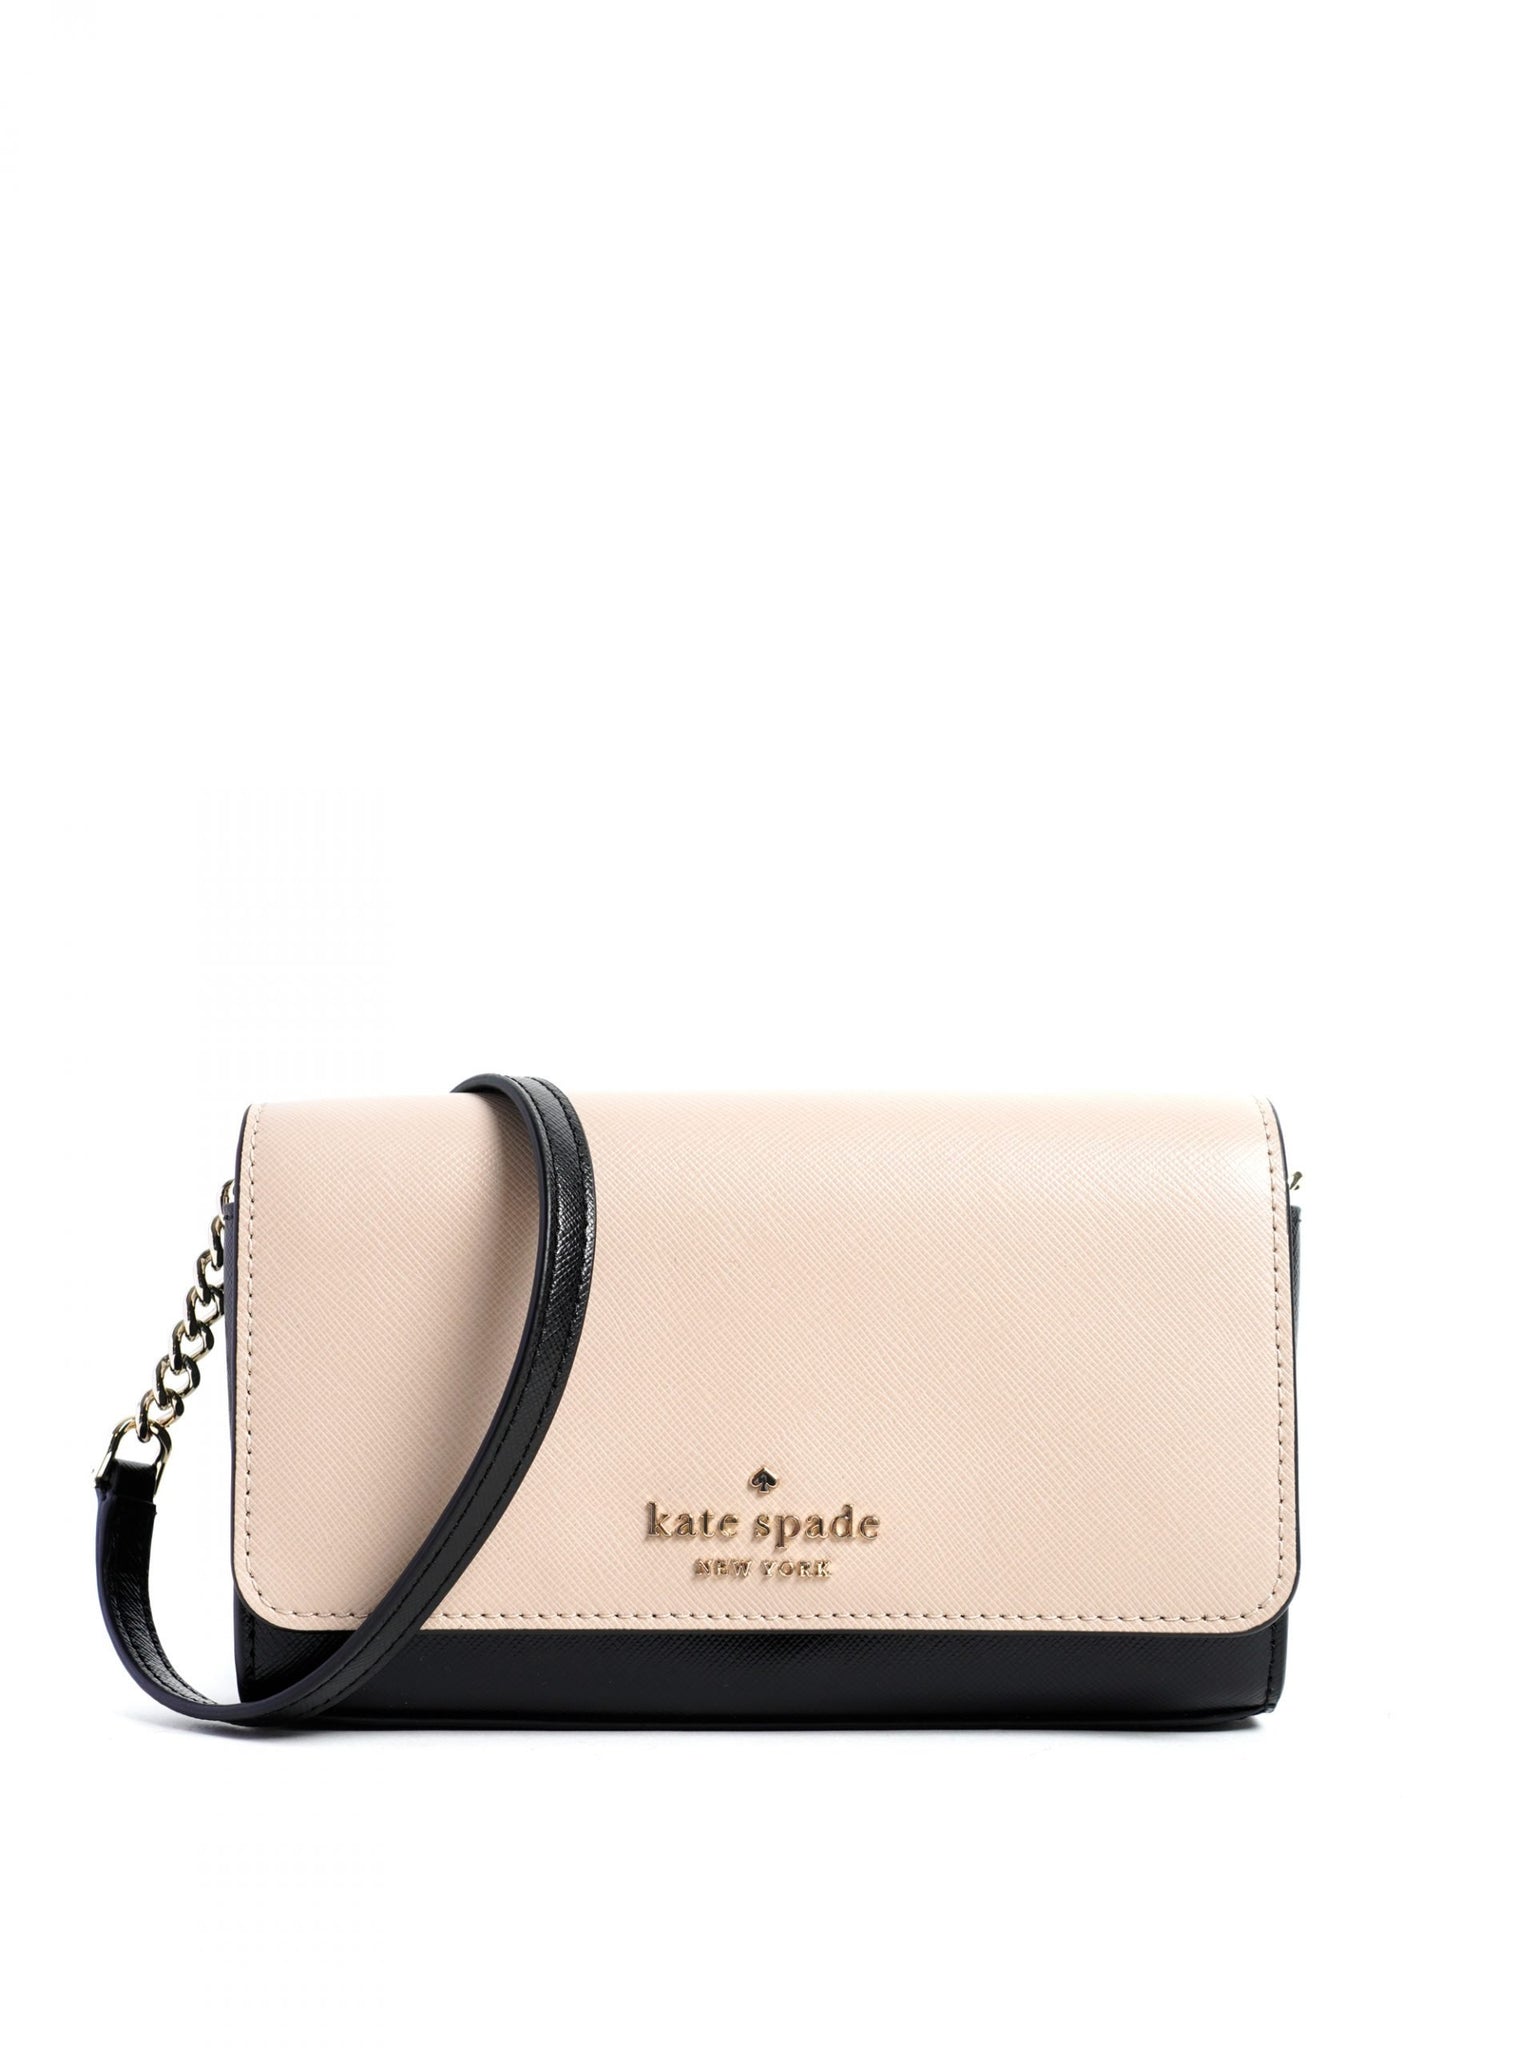 Kate Spade Staci Small Flap Crossbody Bag with Saffiano Leather in